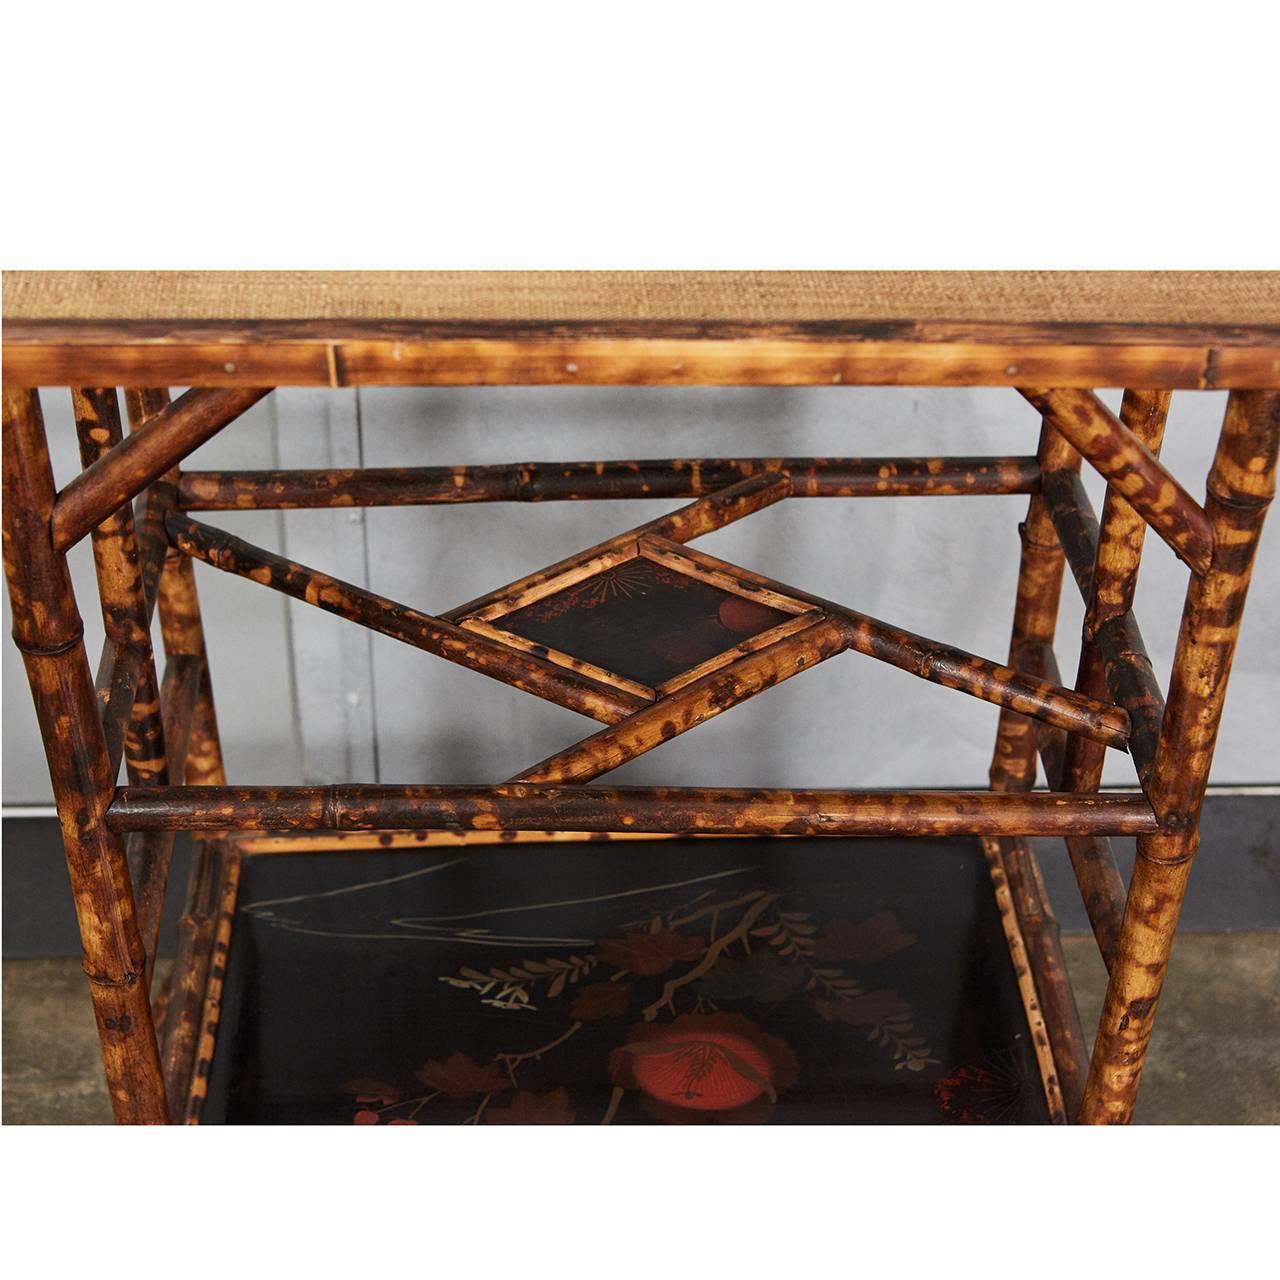 This exquisite English Victorian tiger bamboo table has intricate two lacquered panels and intricate lattice supports. Between the top and the lower shelf are a set of supports holding an inset diamond shaped lacquered panel. The lower shelf has a